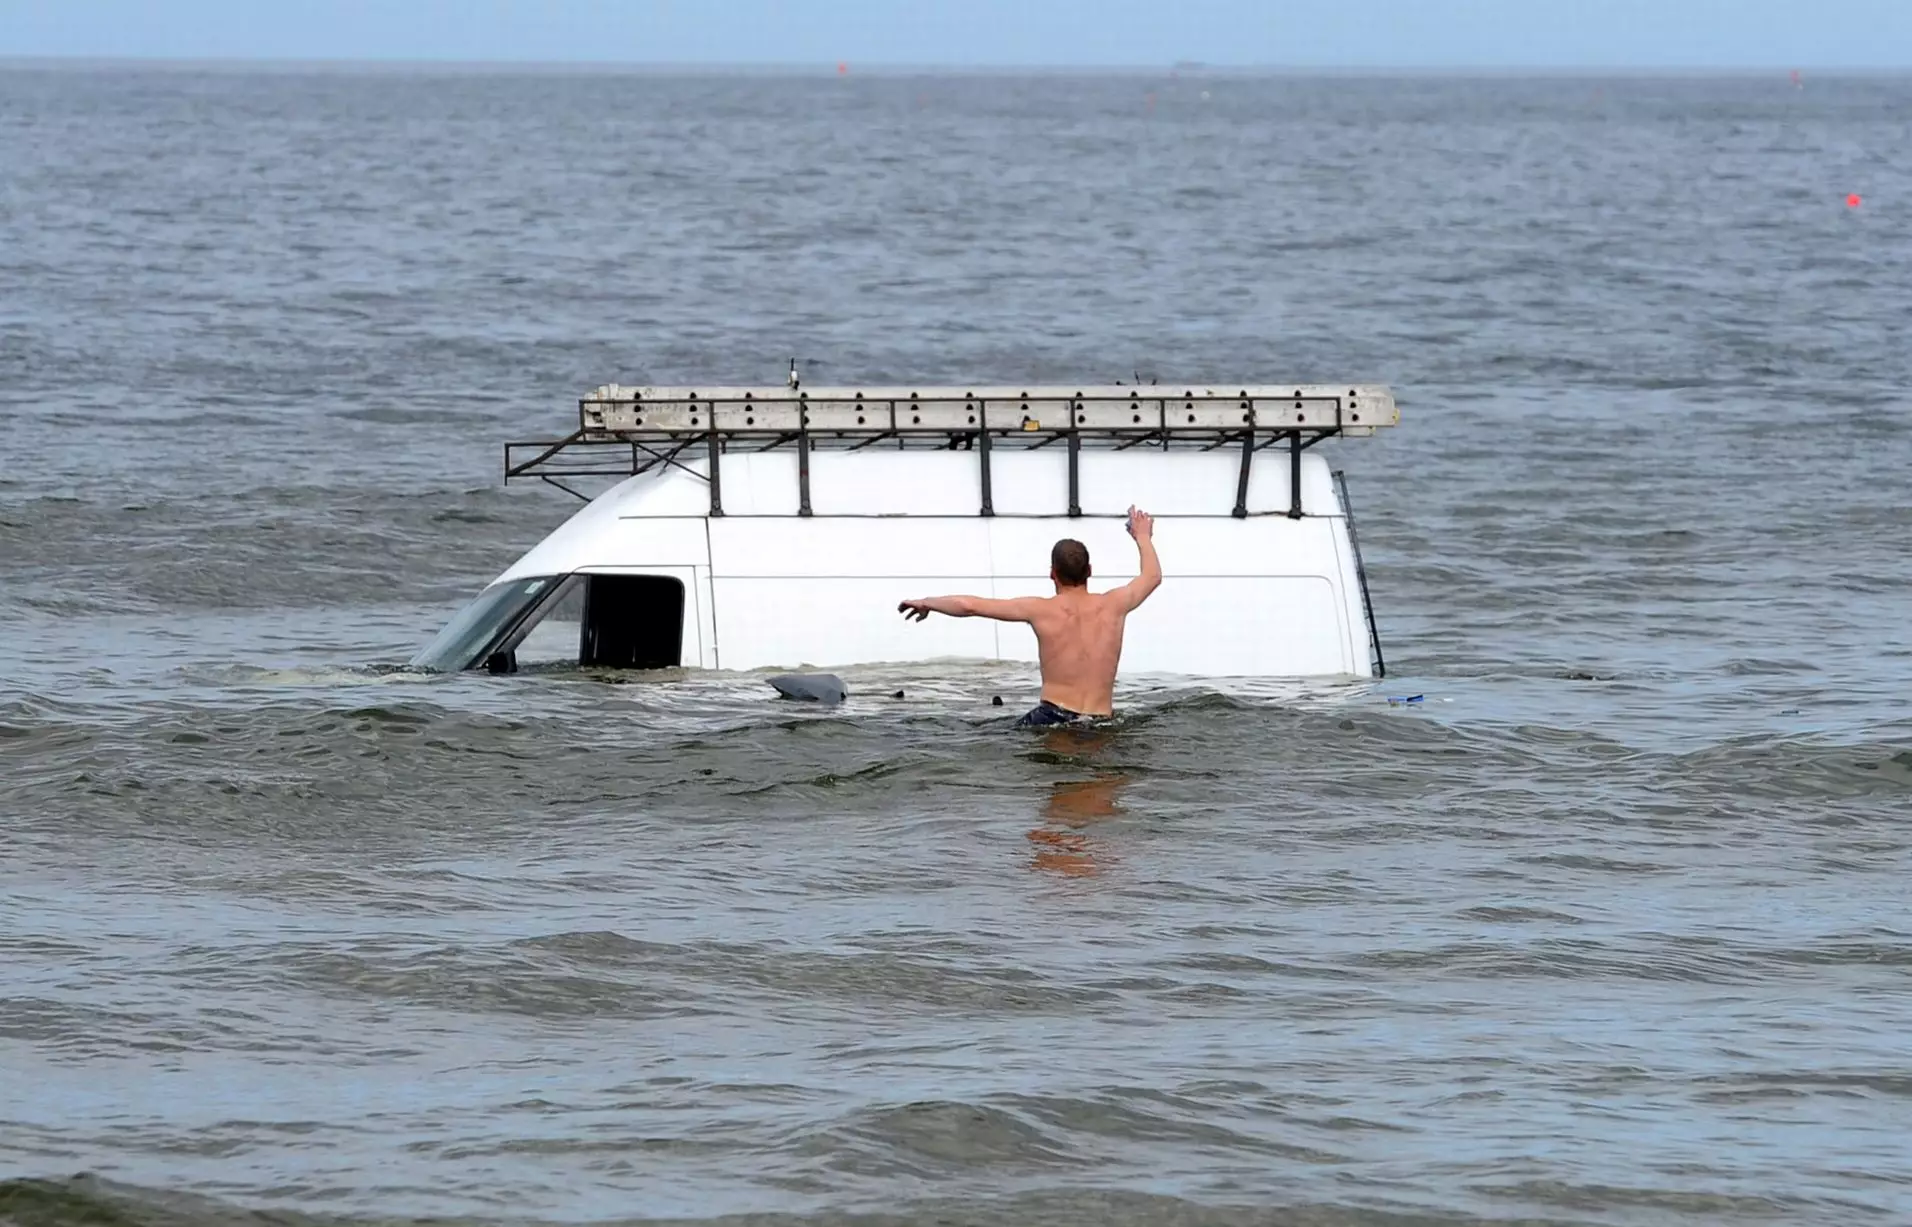 The man's van became stuck when the tide came in.